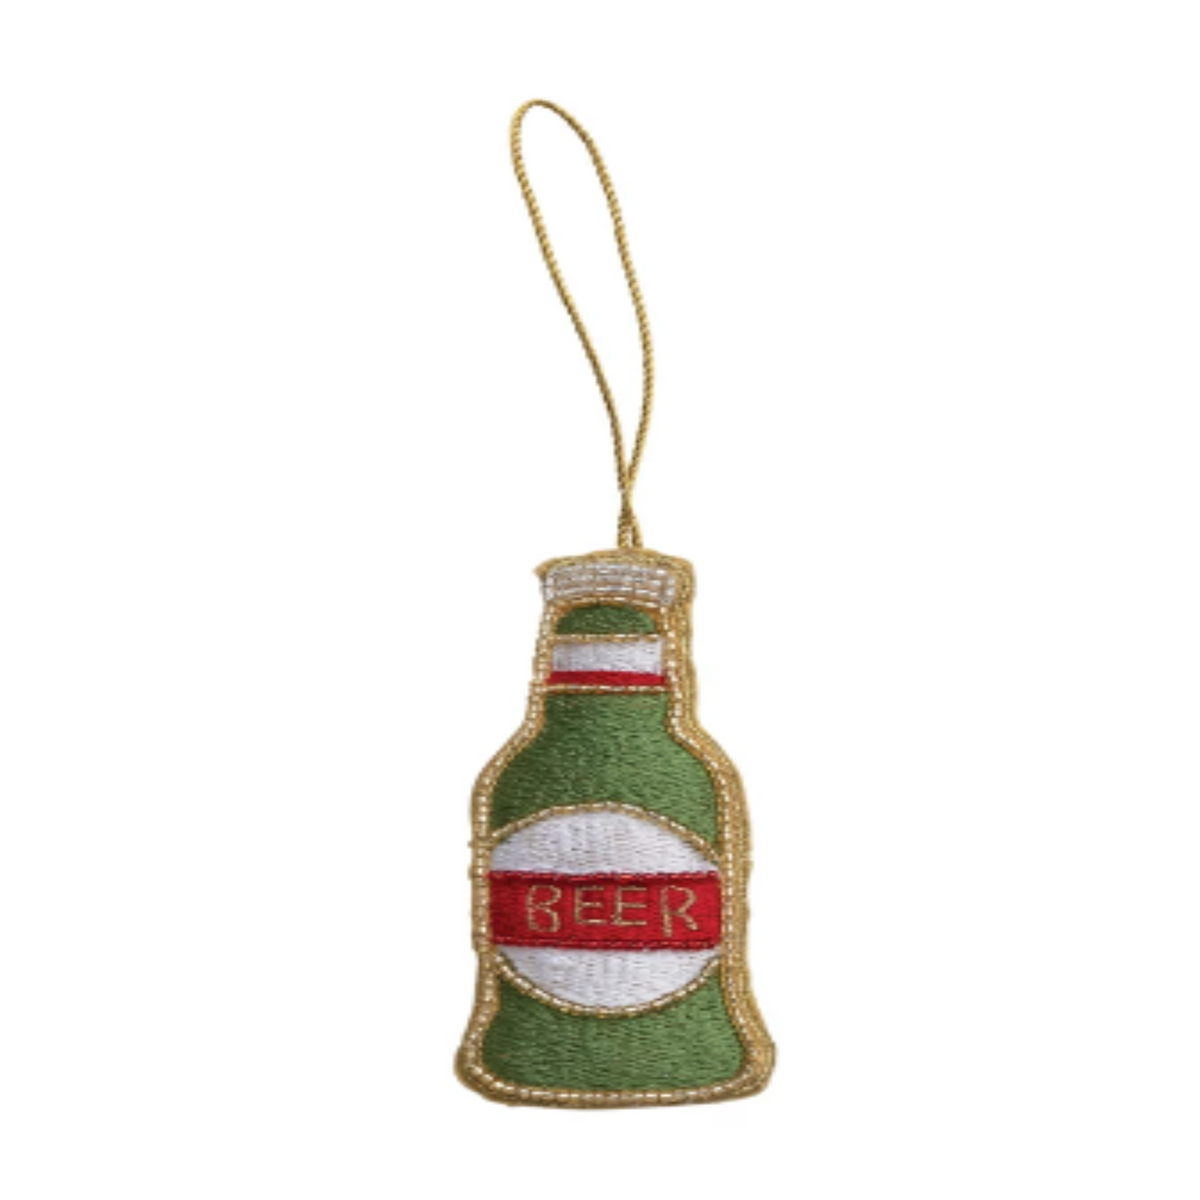 Imperfect Fabric Beer Bottle Ornament w/ Embroidery &amp; Beads